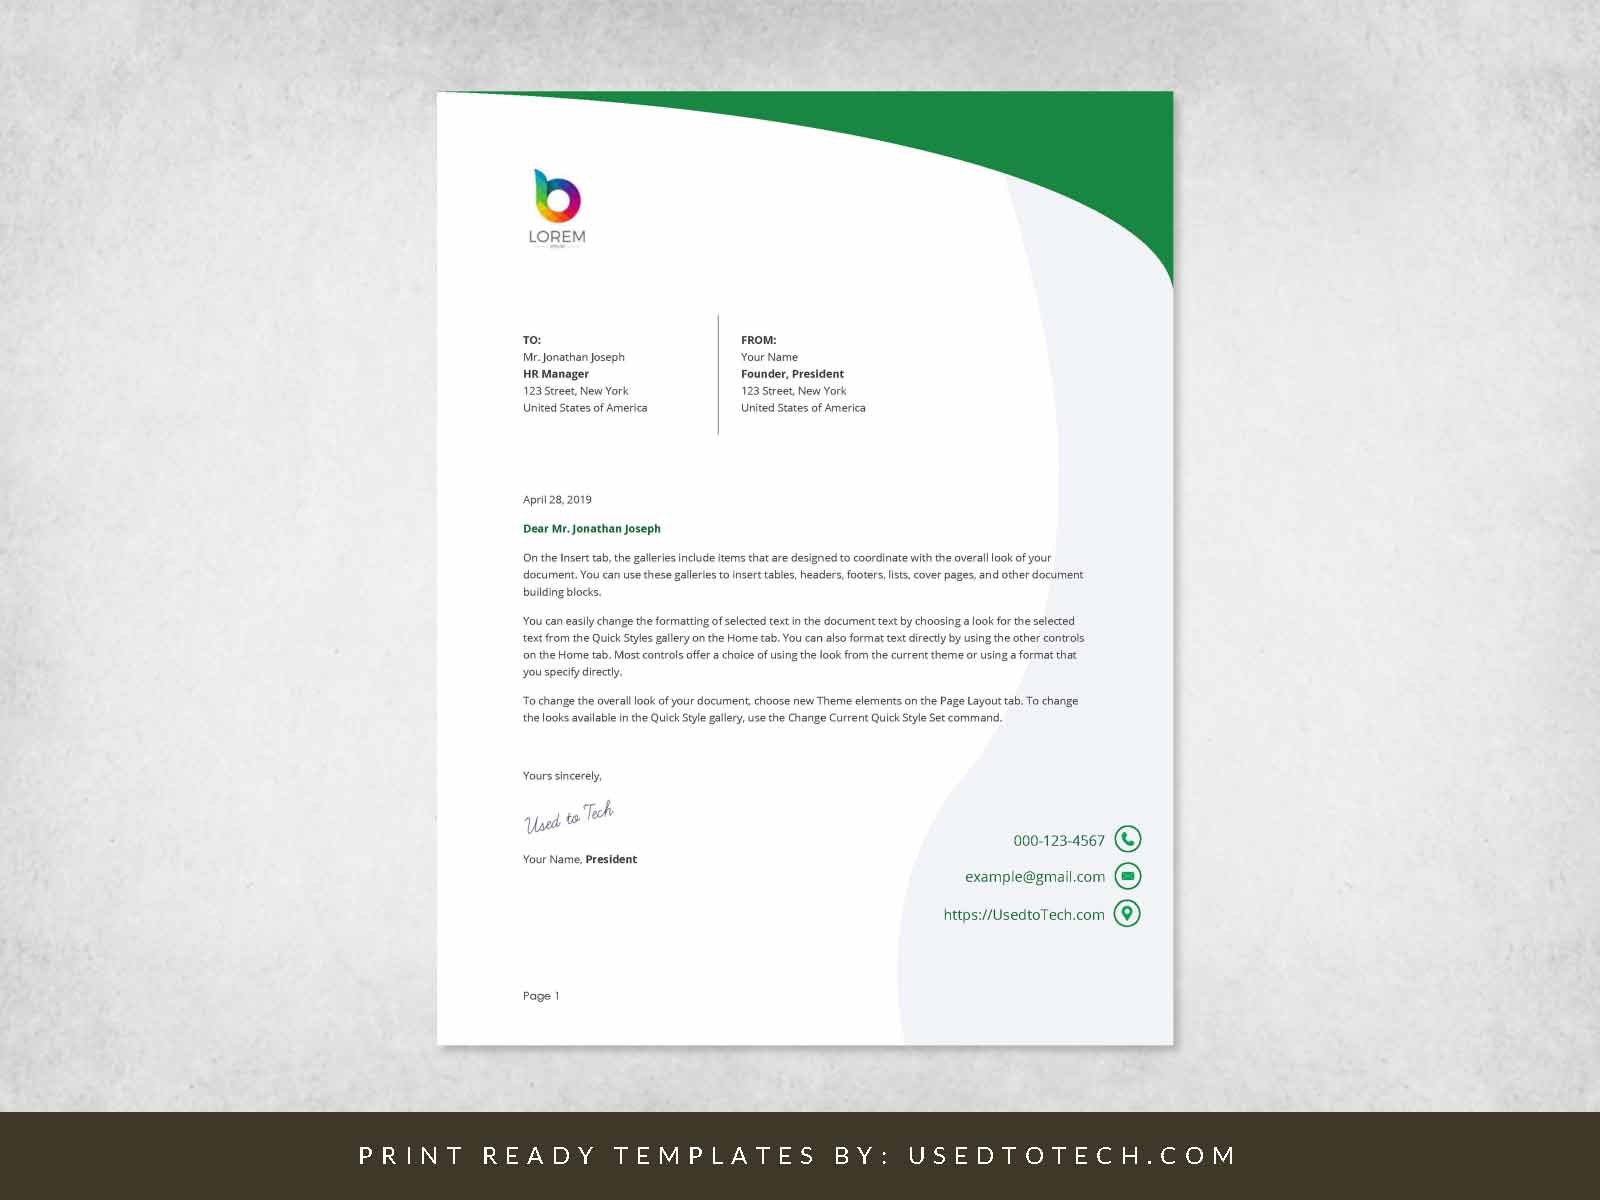 Perfect letterhead design in Word free - Used to Tech With Free Letterhead Templates For Microsoft Word